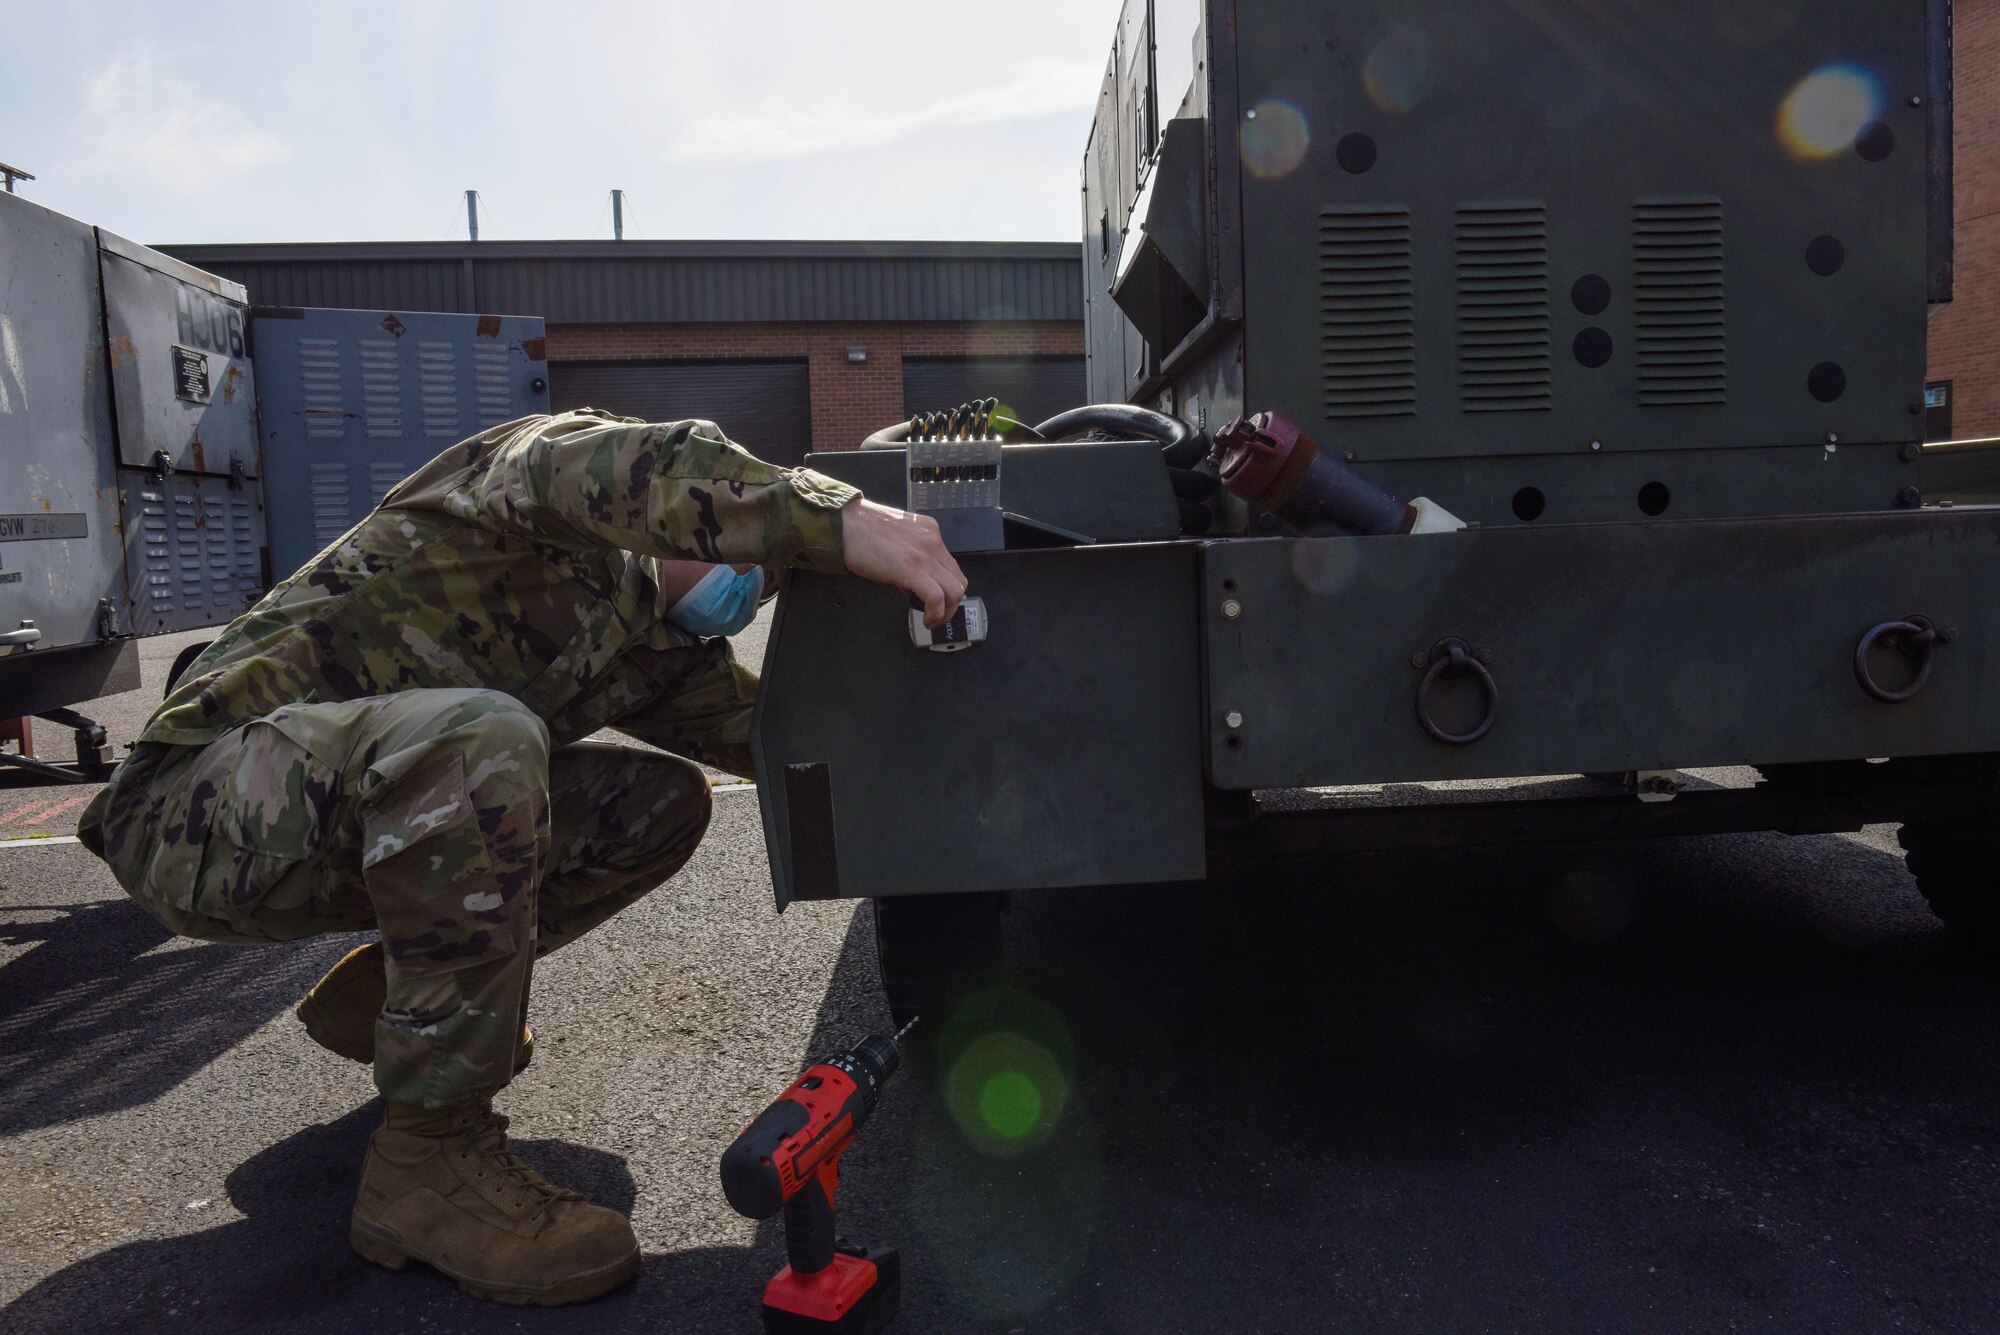 U.S. Air Force Tech. Sgt. Harley Hall, 446th Maintenance Squadron Aerospace Ground Equipment craftsman, installs a GPS tracking device to an AGE mobile generator on Joint Base Lewis-McChord, Washington, May 13, 2021. The new GPS trackers are designed to save time to keep track of AGE equipment. (U.S. Air Force photo by Senior Airman Mikayla Heineck)